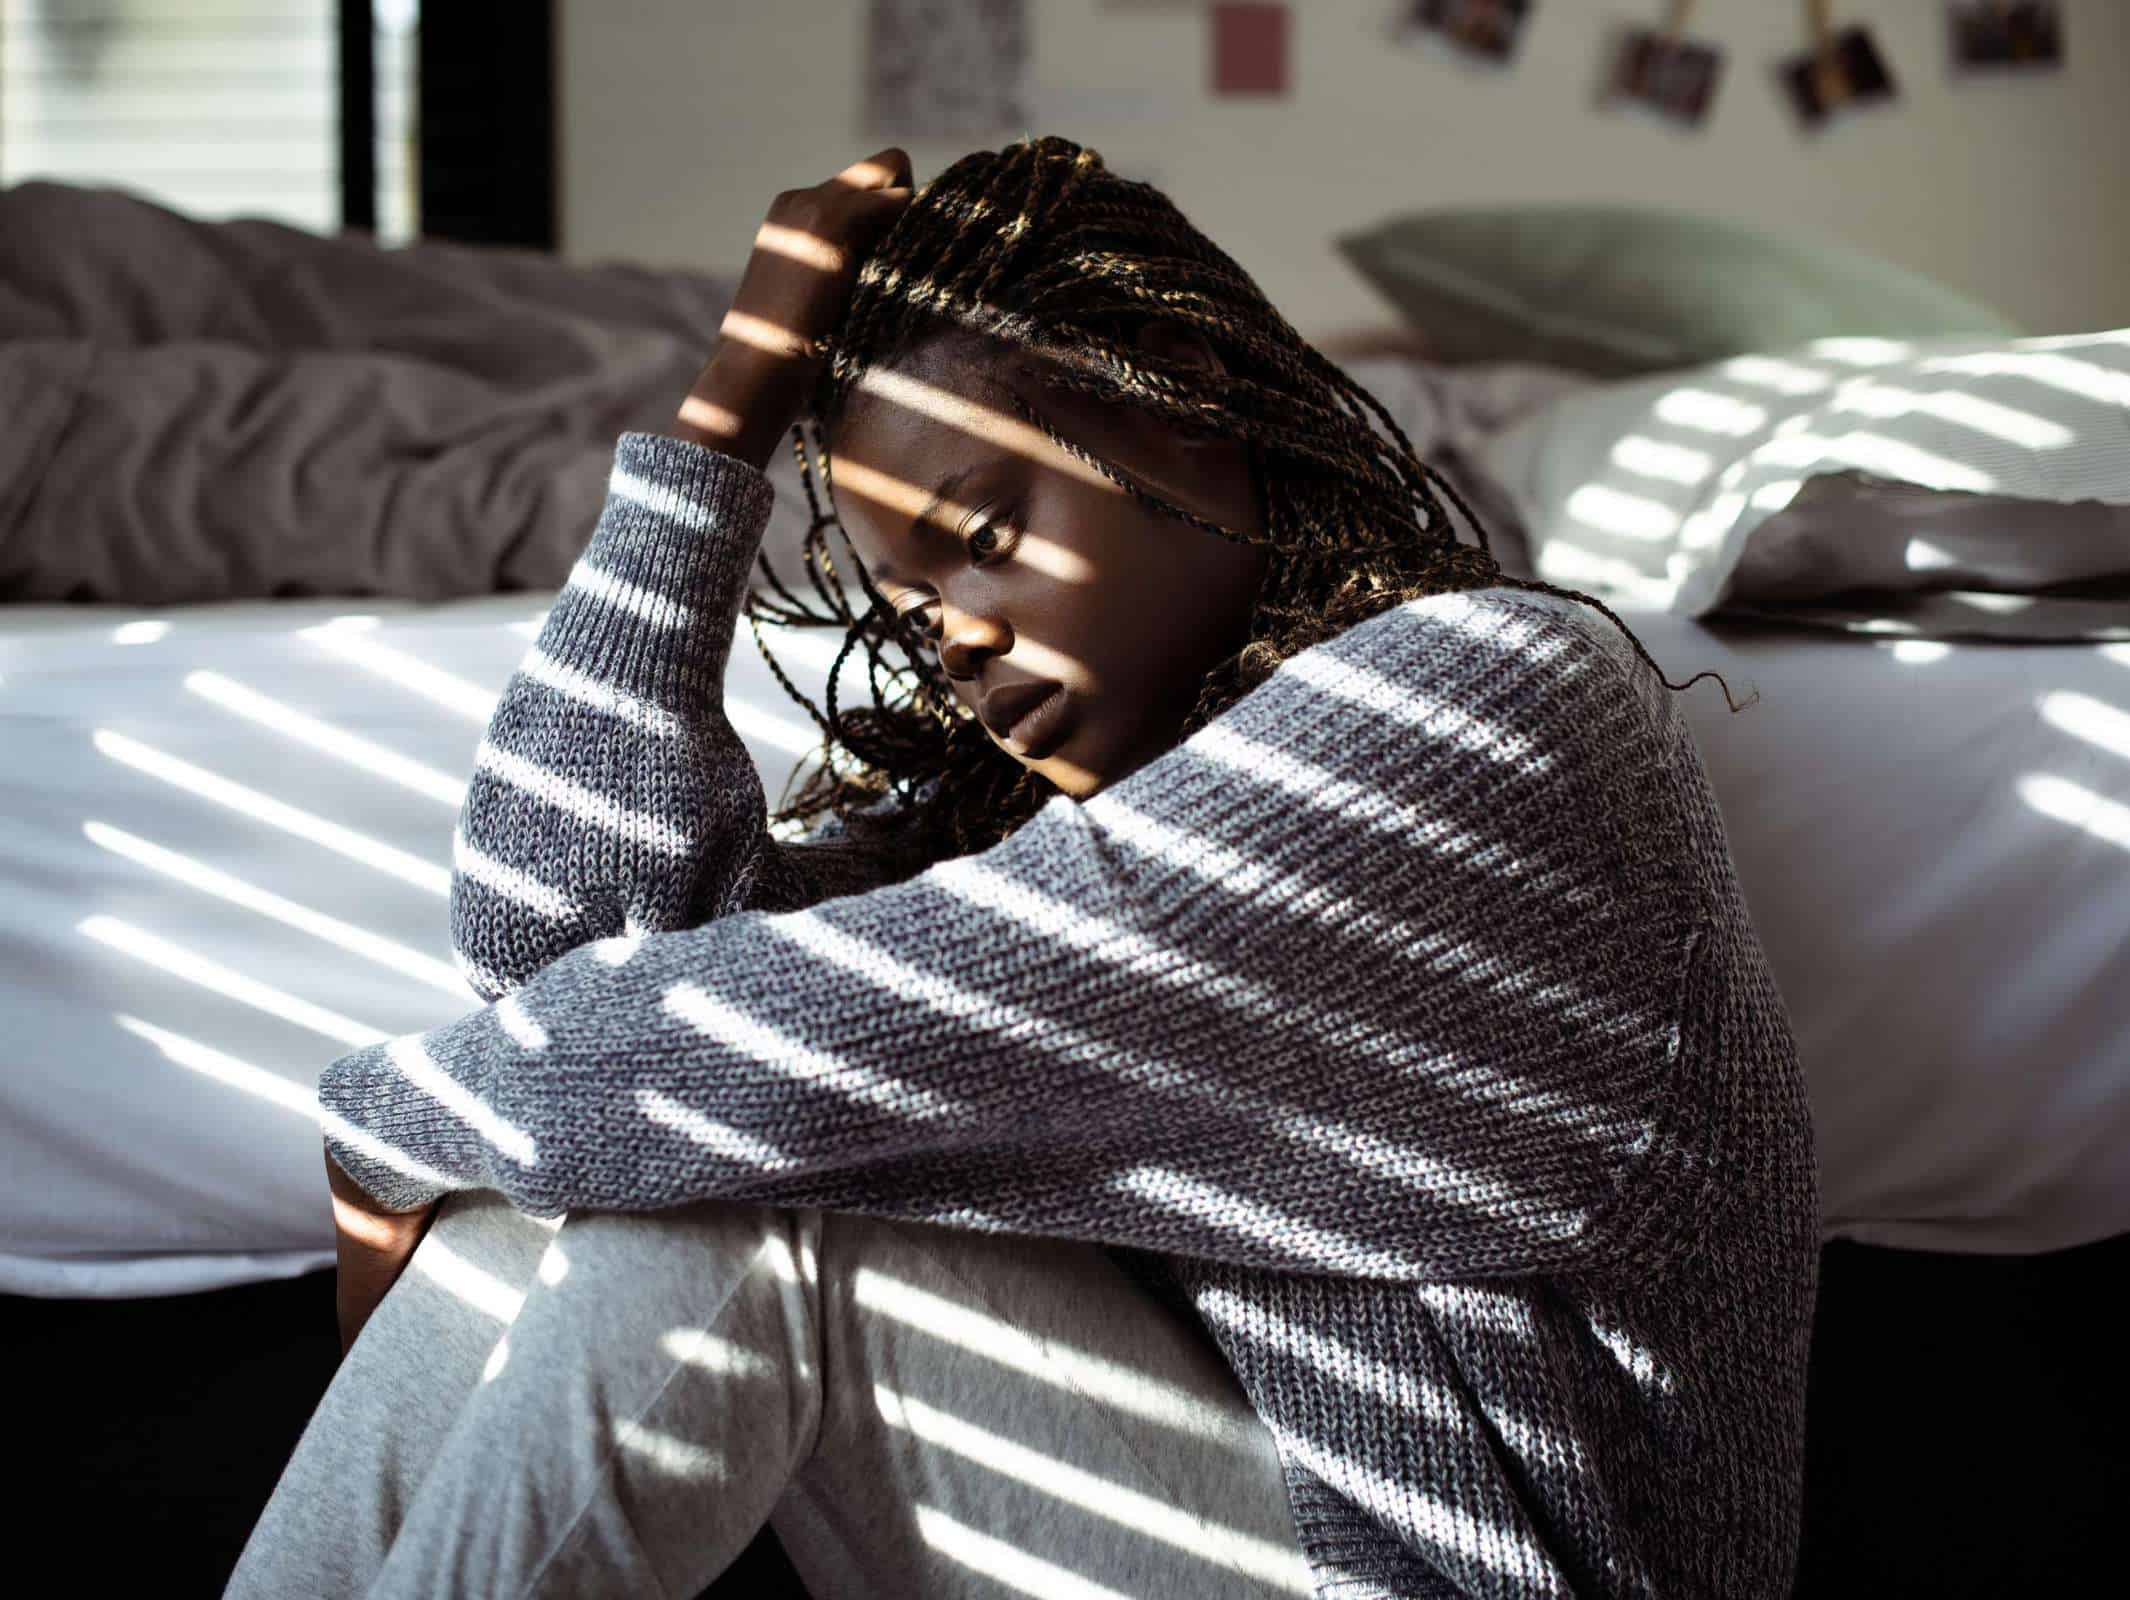 How to Survive Teen Stress, Depression and Social Isolation